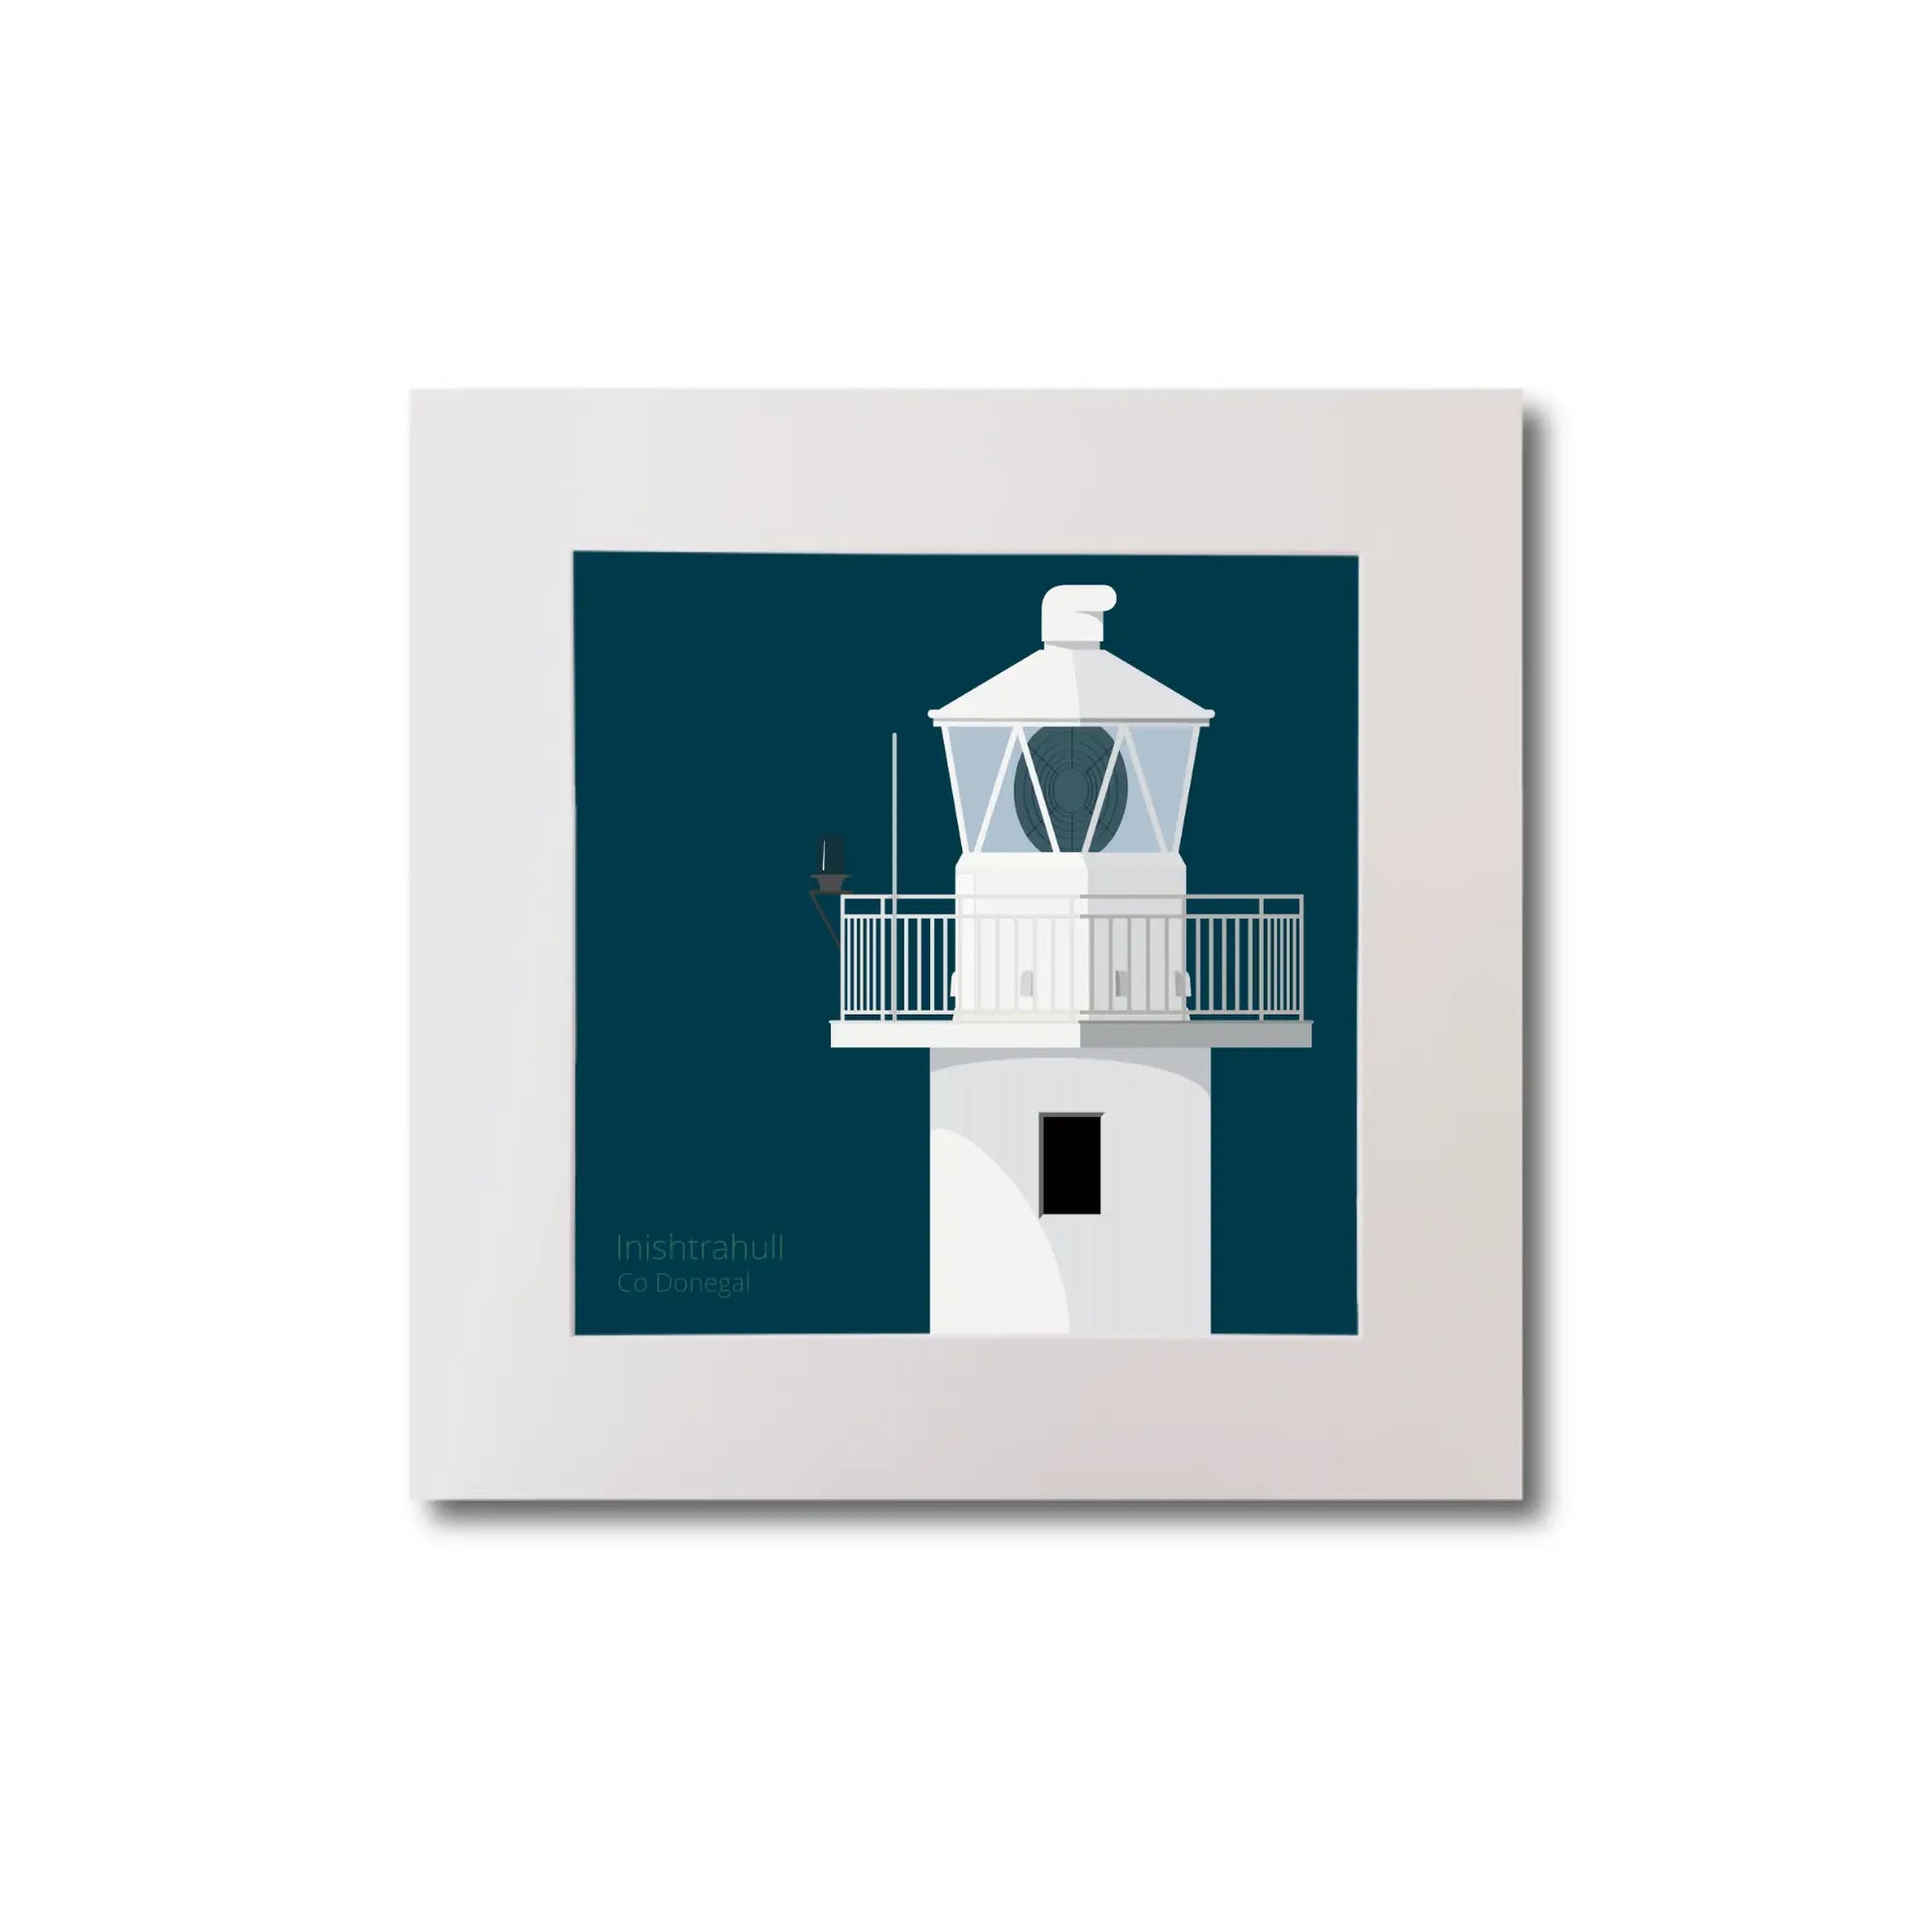 Illustration of Inishtrahull lighthouse on a midnight blue background, mounted and measuring 20x20cm.